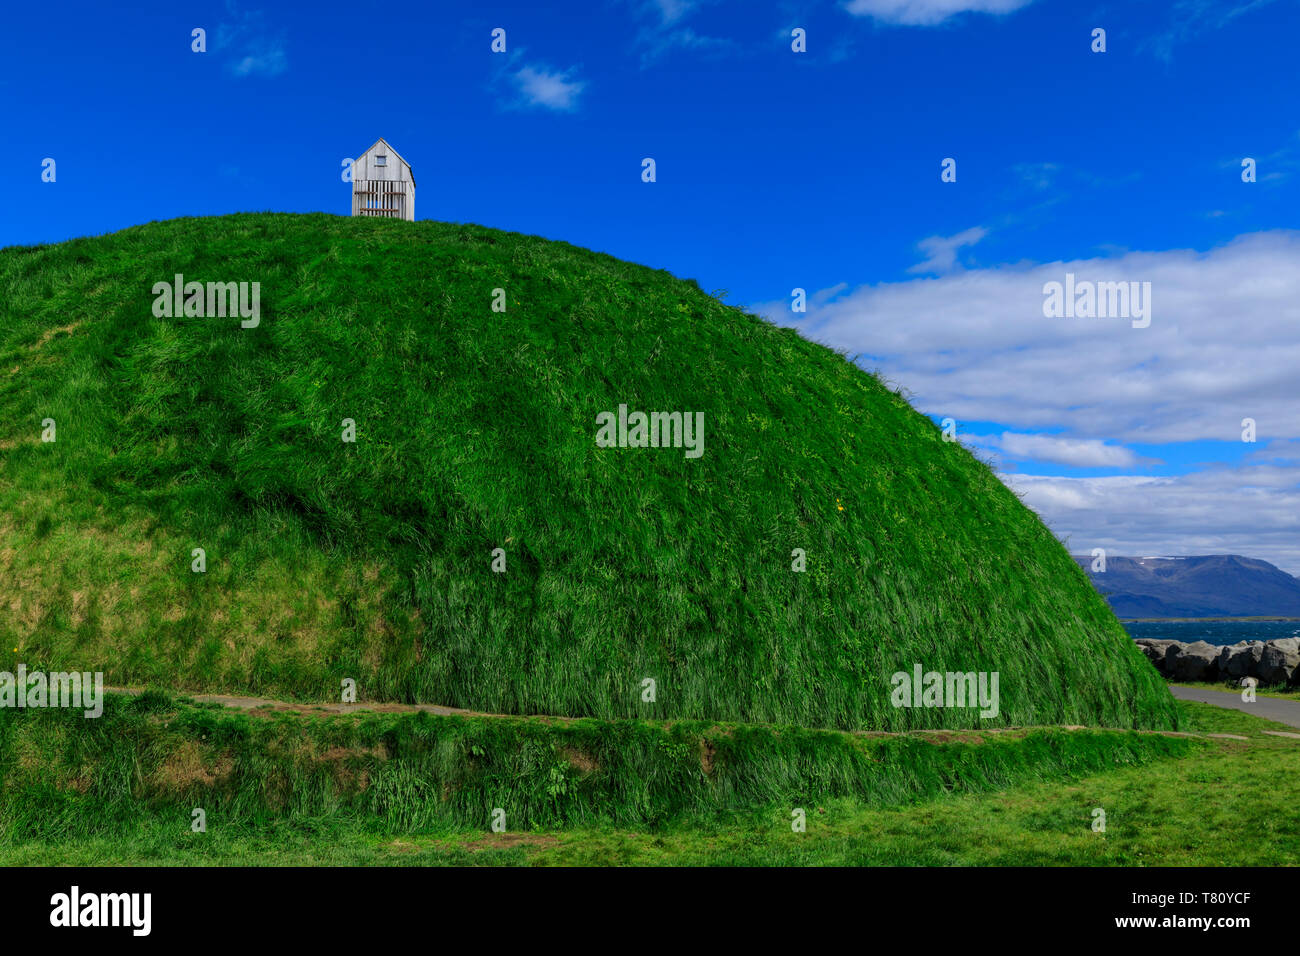 Thufa, green mound, blue sky, little house or fish drying shed in summer, Mount Esja, Old Harbour, Reykjavik, Iceland, Polar Regions Stock Photo